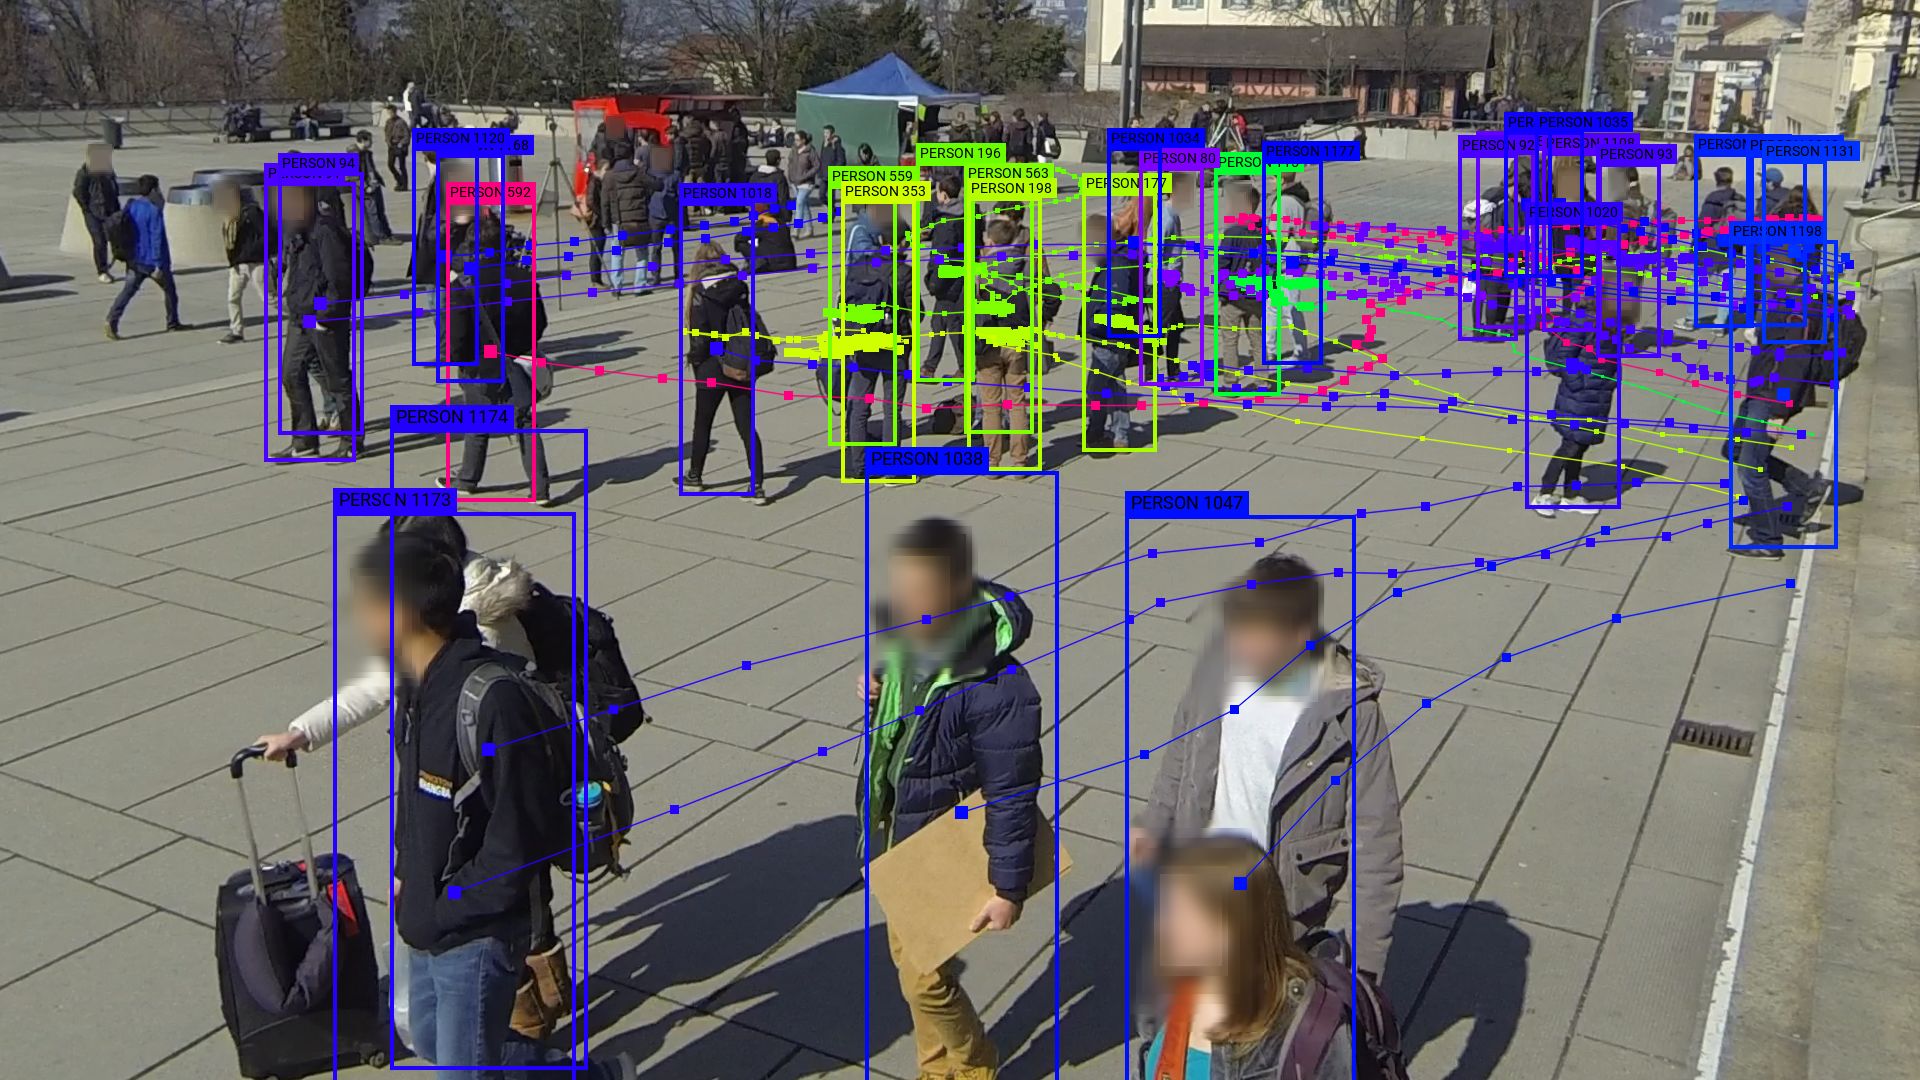 A still image from Wildtrack dataset collected at EHZ Zurich, where researchers recorded students and publicly distributed their videos for surveillance research. The image is annotated to track students across multiple video frames.